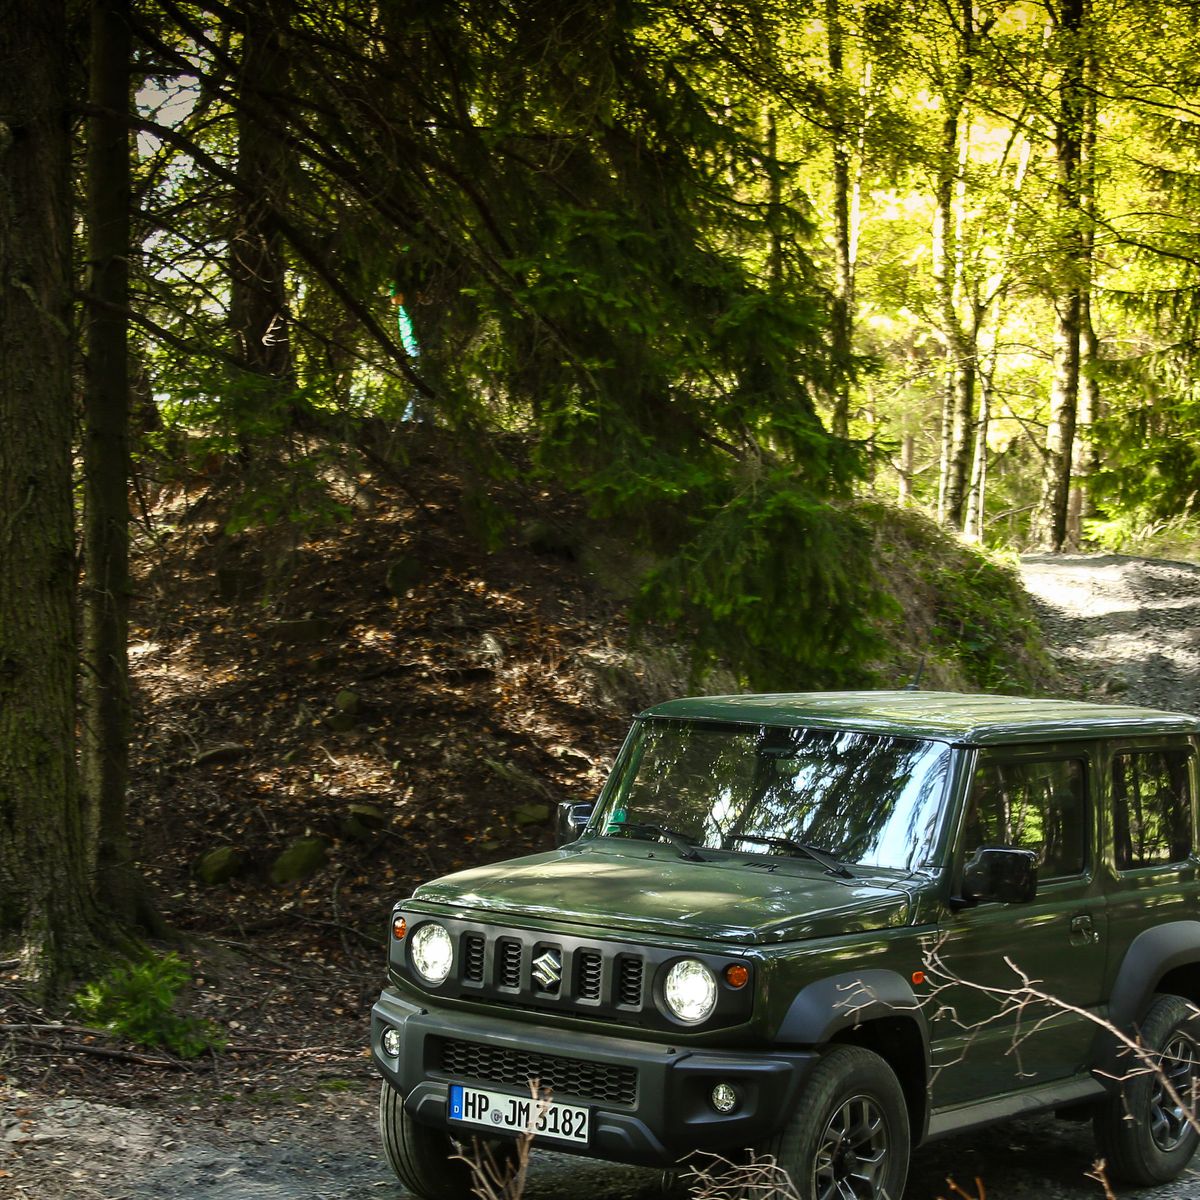 2020 Suzuki Jimny Is an Adorable and Tiny Off-Road Box that We Can